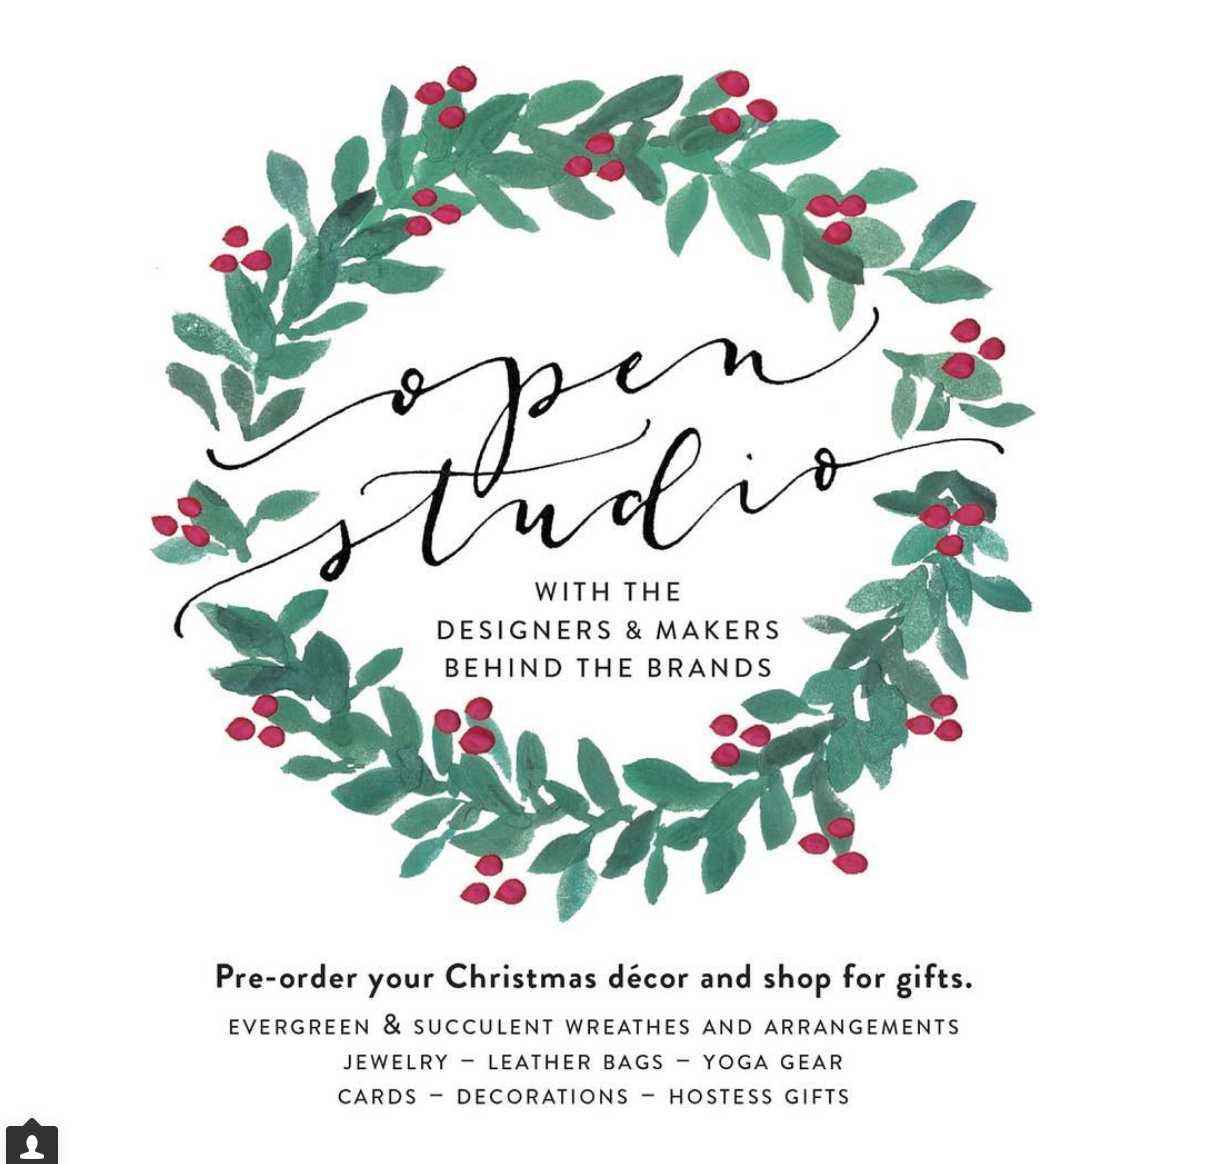 Join us for Open Studio & Holiday Shopping, Nov. 21